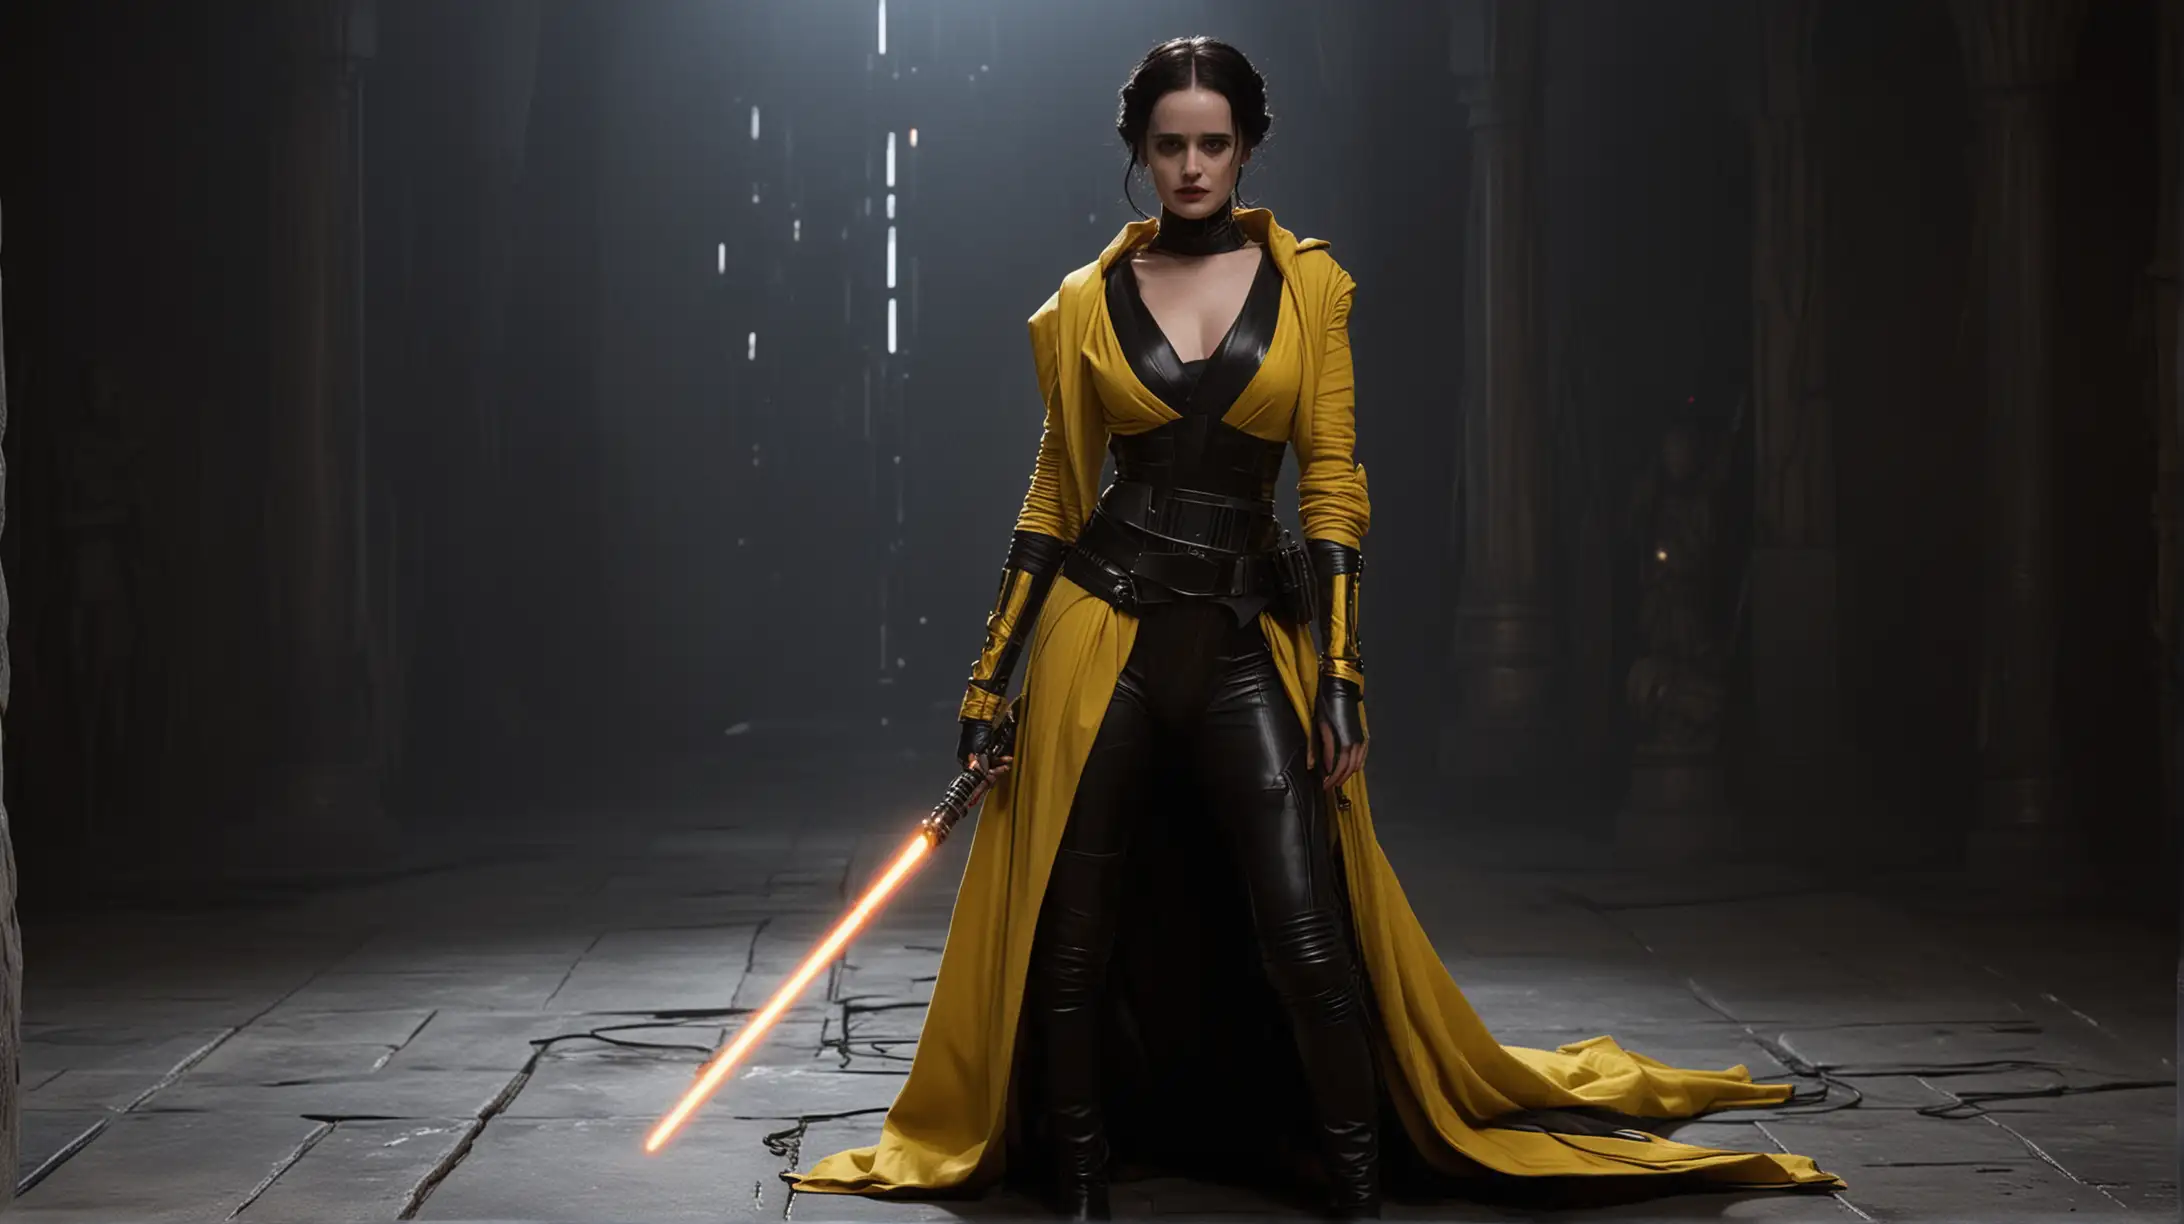 Eva Green Sith Queen in Sensuous Black and Yellow Attire with Lightsaber